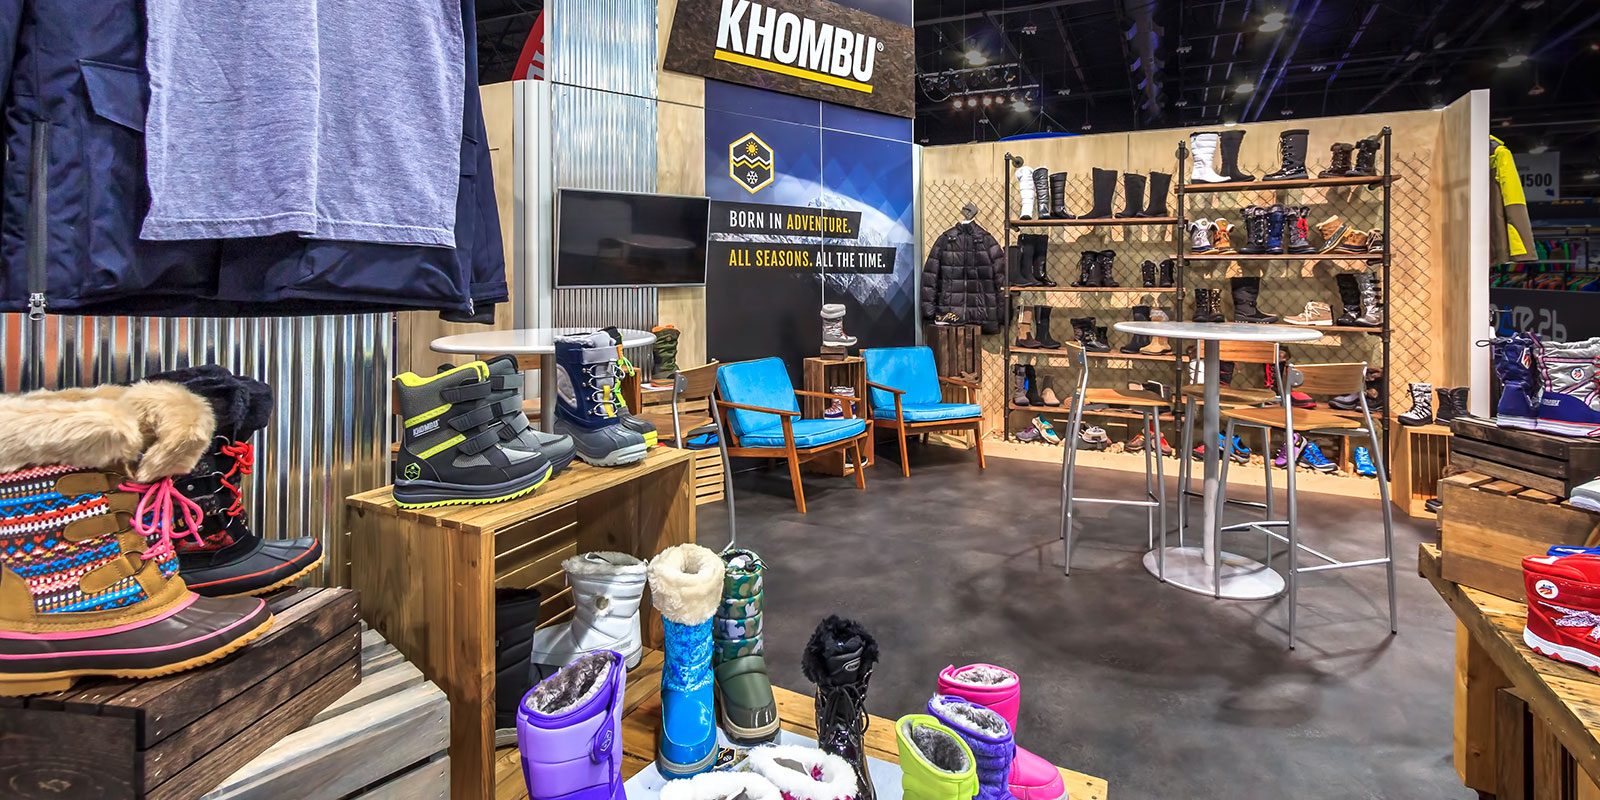 Hill & Partners Rental Branded Environment Trade Show Exhibit for Khombu